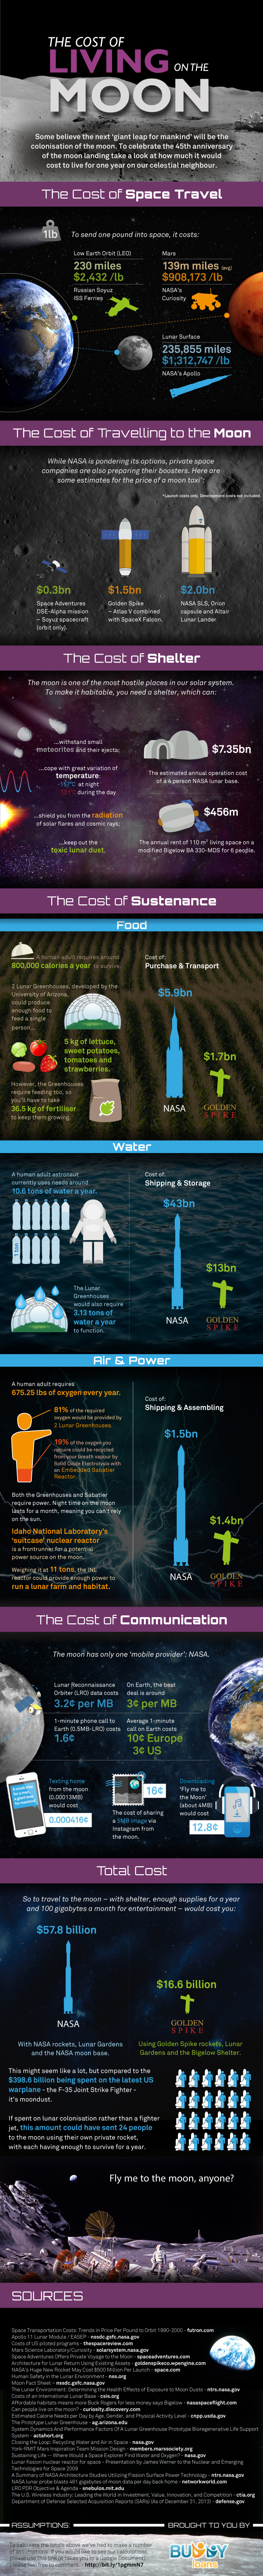 The Cost Of Living on the Moon